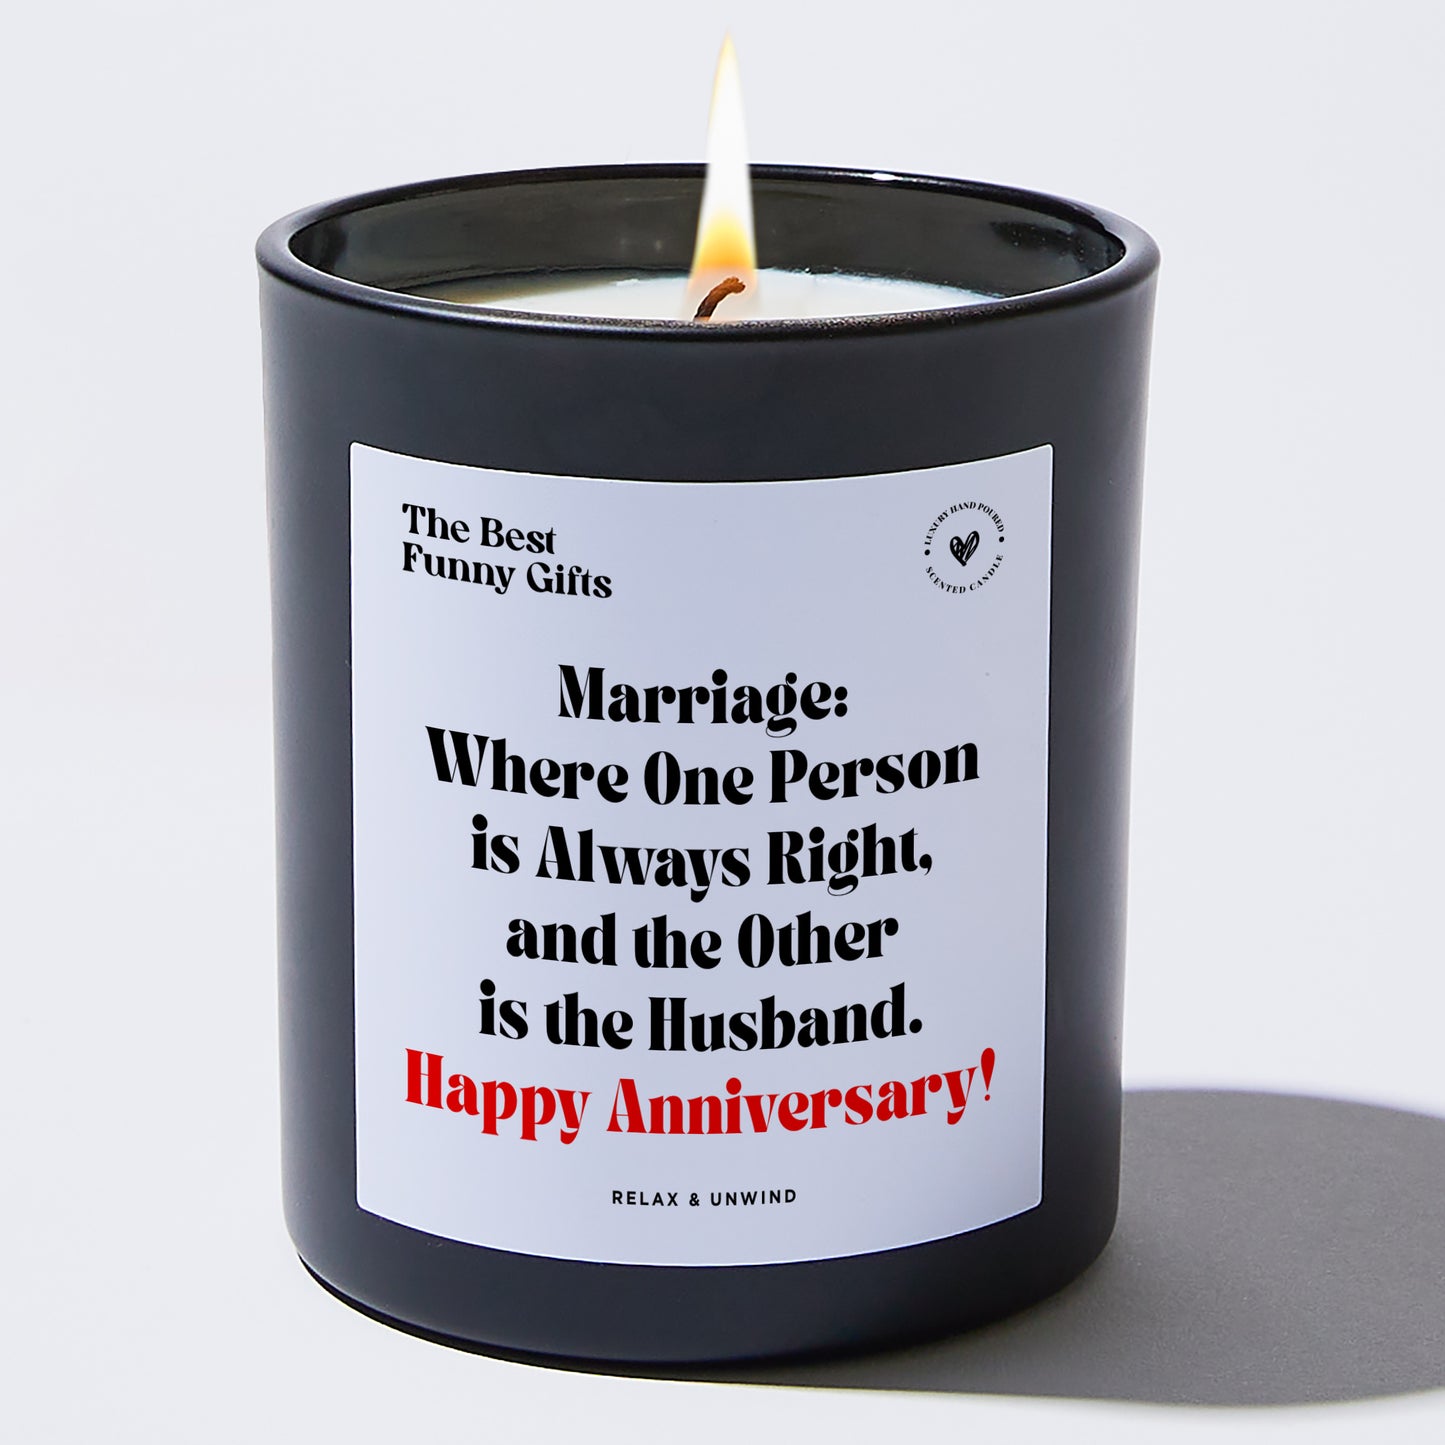 Anniversary Marriage: Where One Person is Always Right, and the Other is the Husband. Happy Anniversary! - The Best Funny Gifts